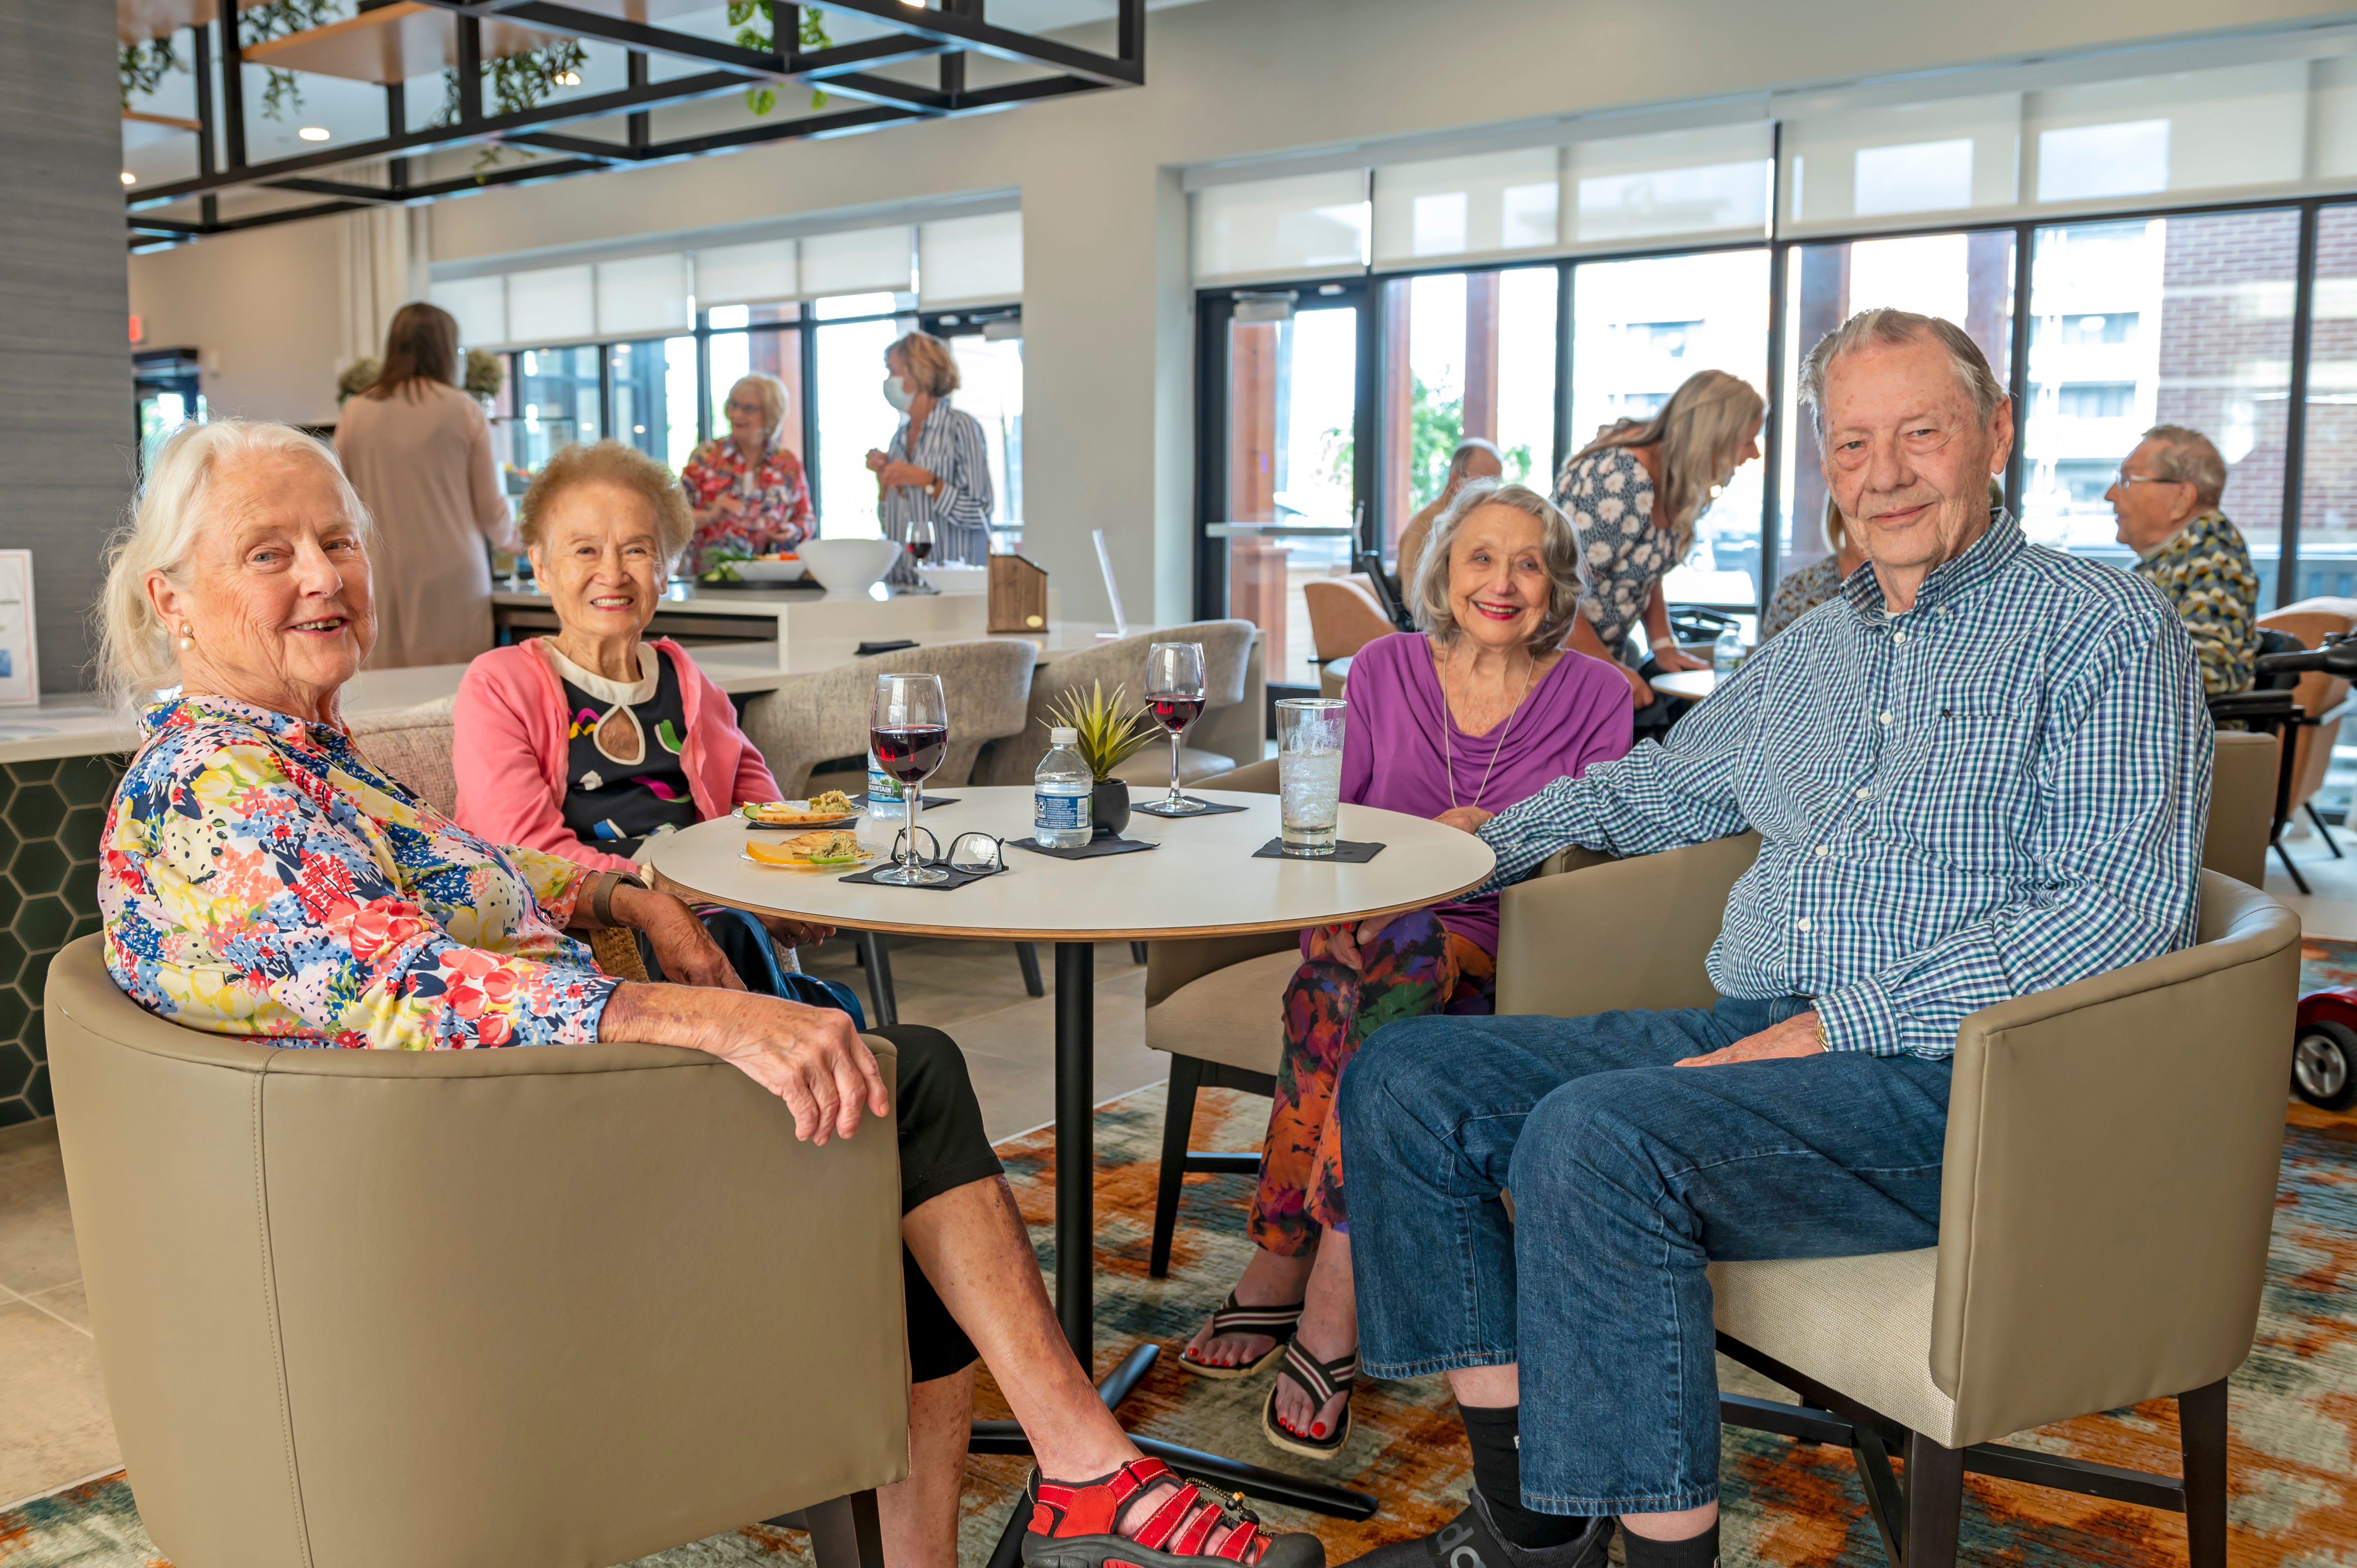 Residents laughing together during breakfast at Anthology of Blue Ash in Blue Ash, Ohio